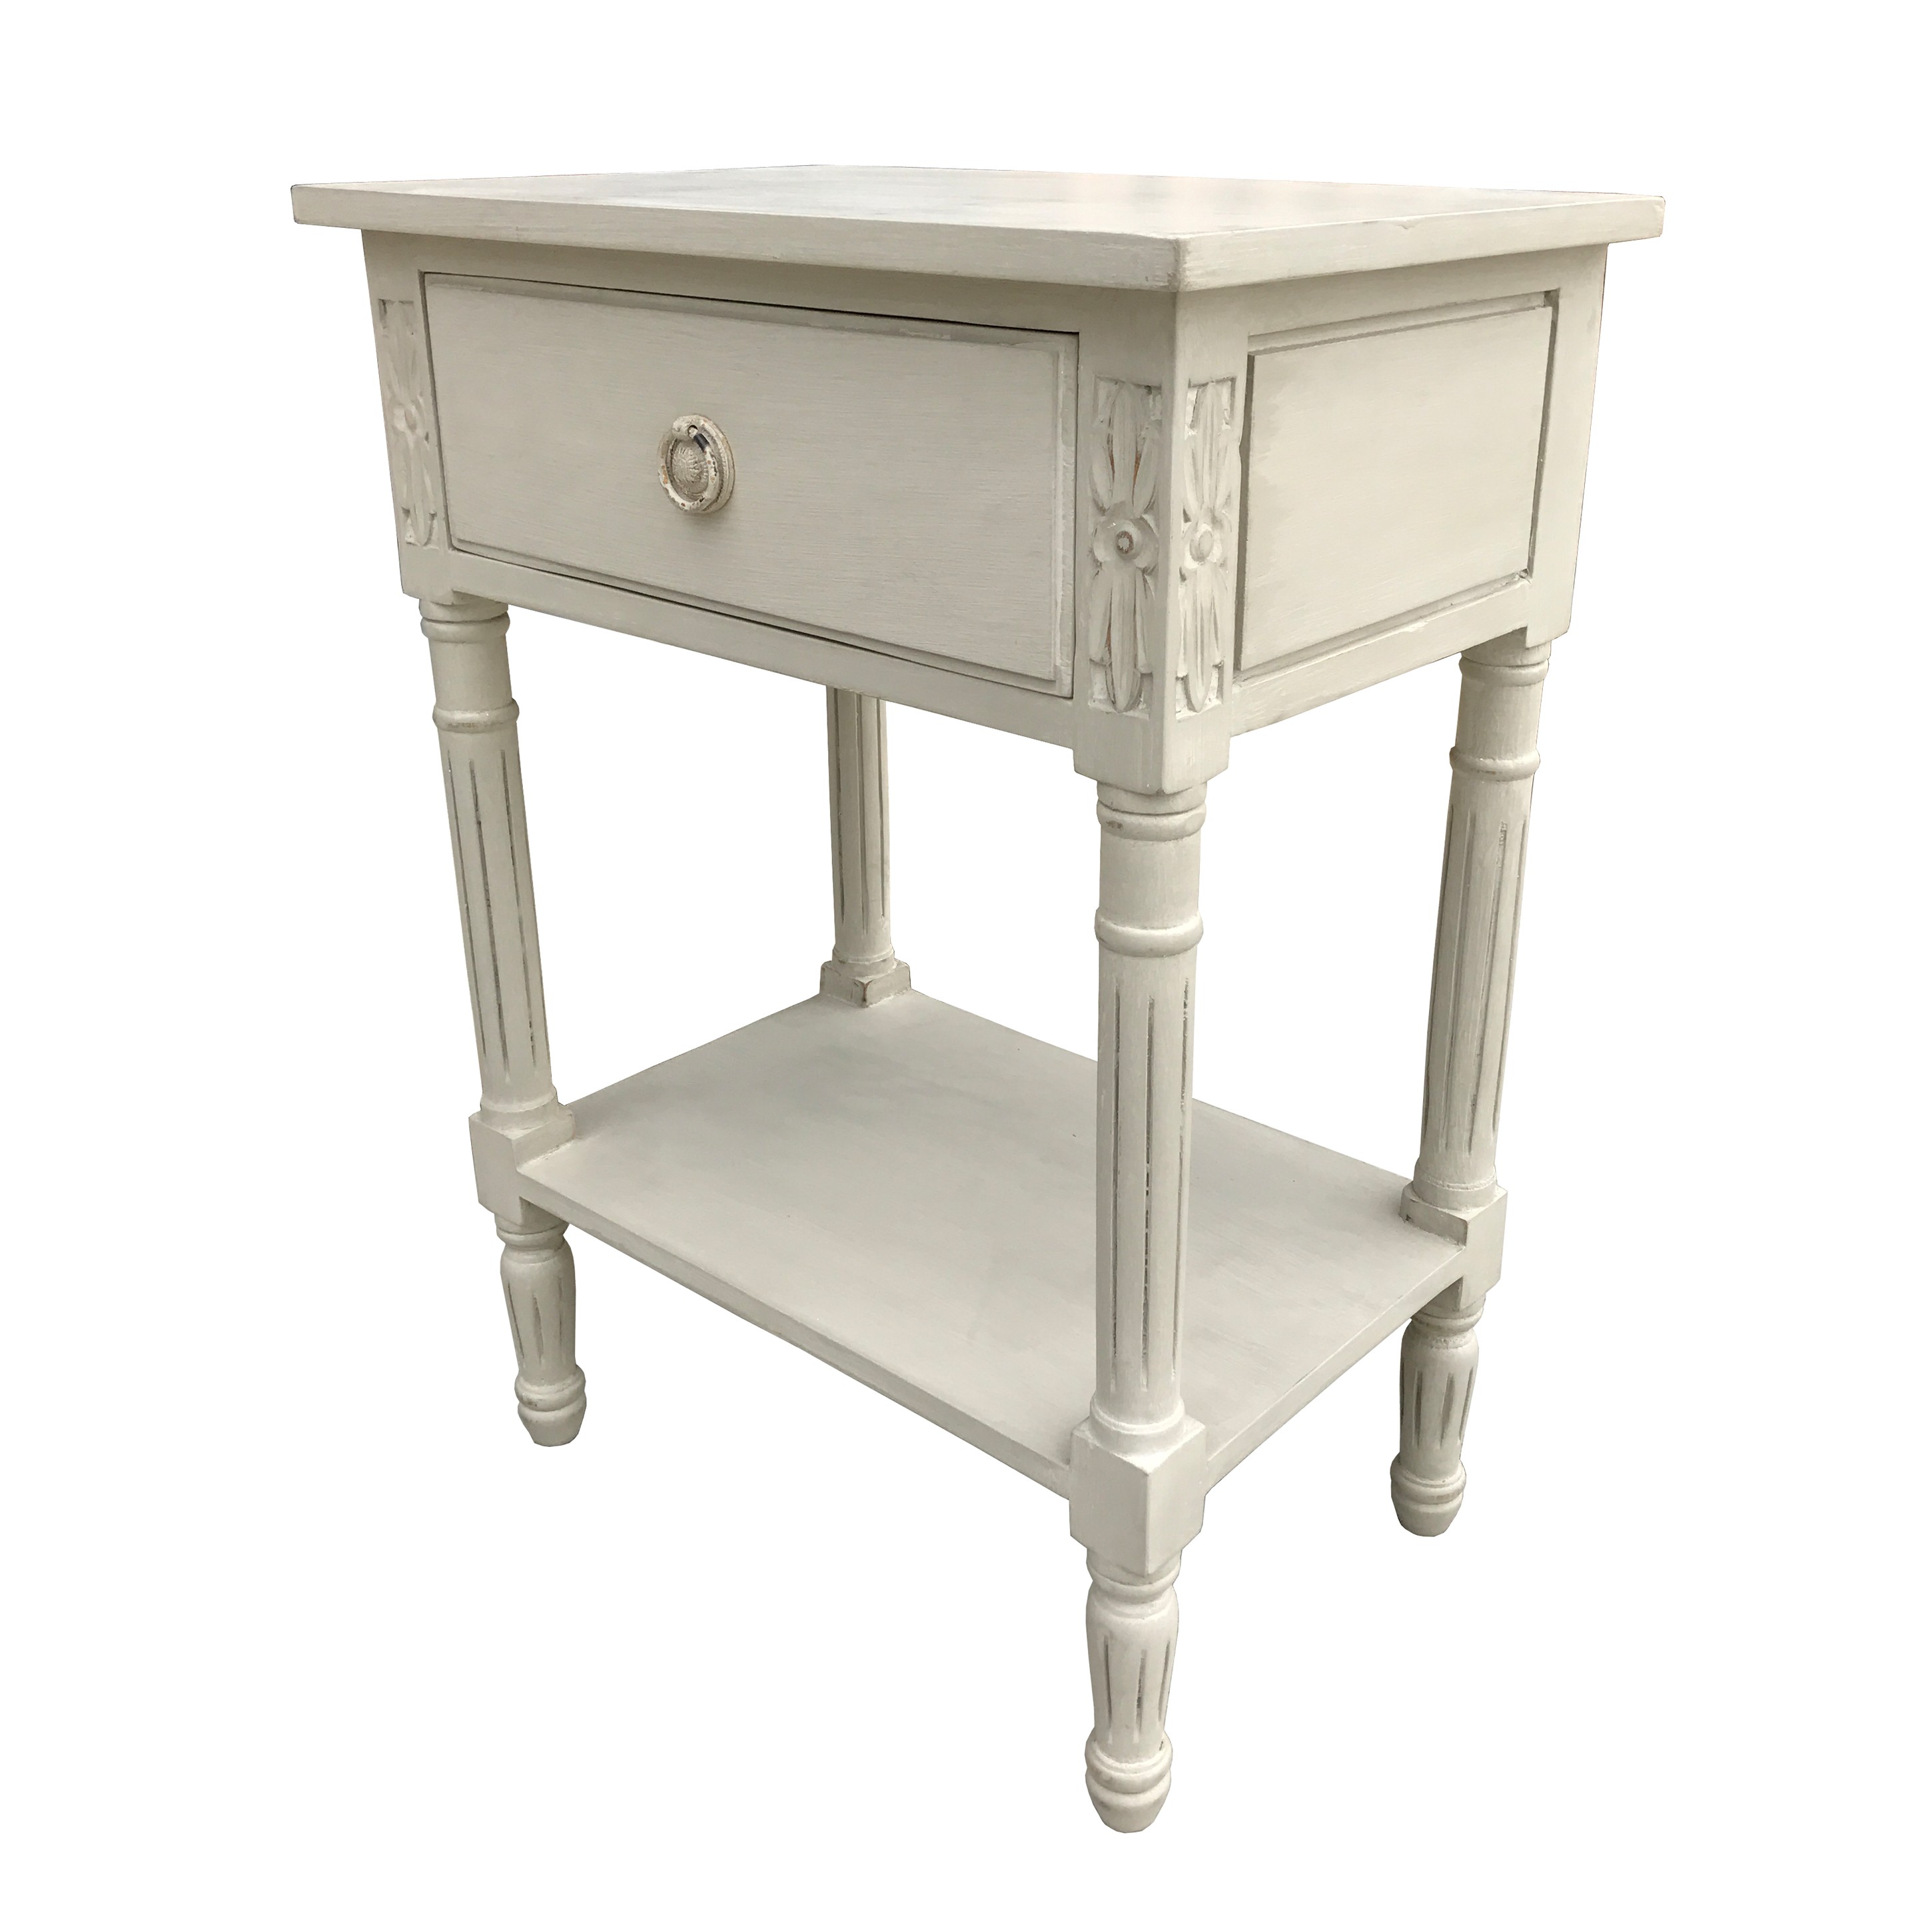 french grey distressed side table uneeka end tables second hand dresser thomasville hotel furniture threshold assembly instructions jos ethan allen british classics armoire glass